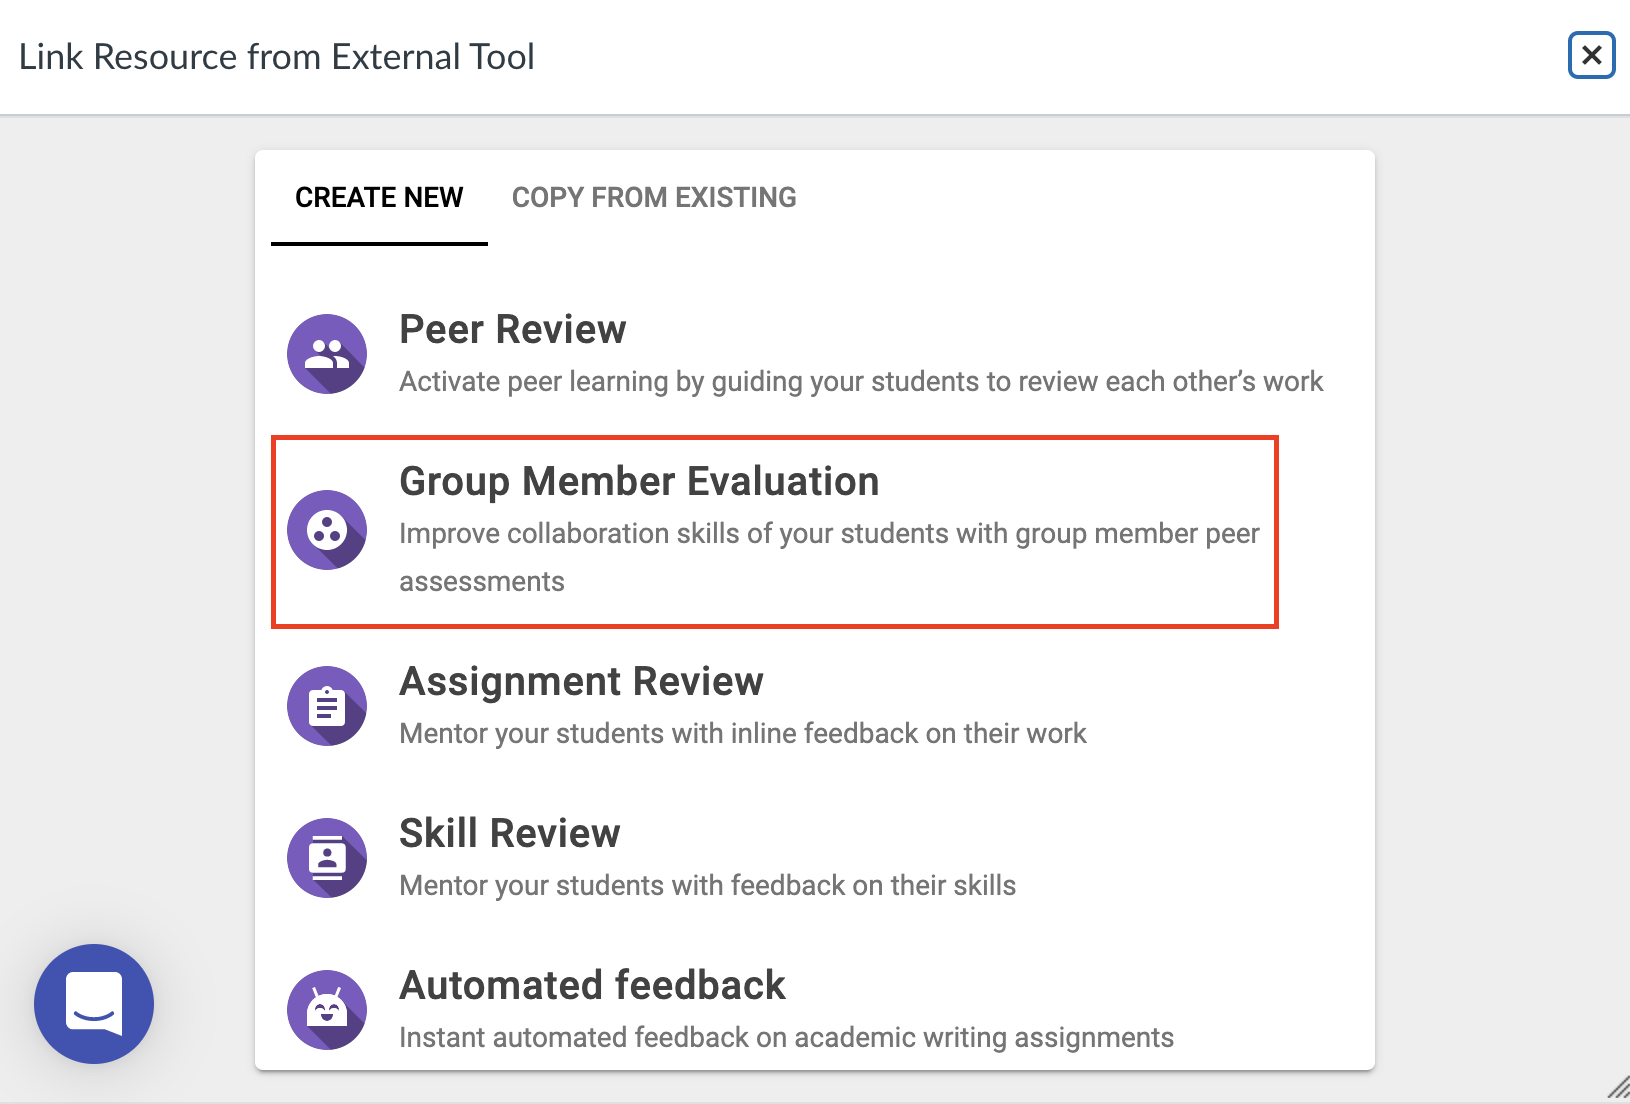 In Link Resource from External Tool screen, option for Group Member Evaluation encircled.